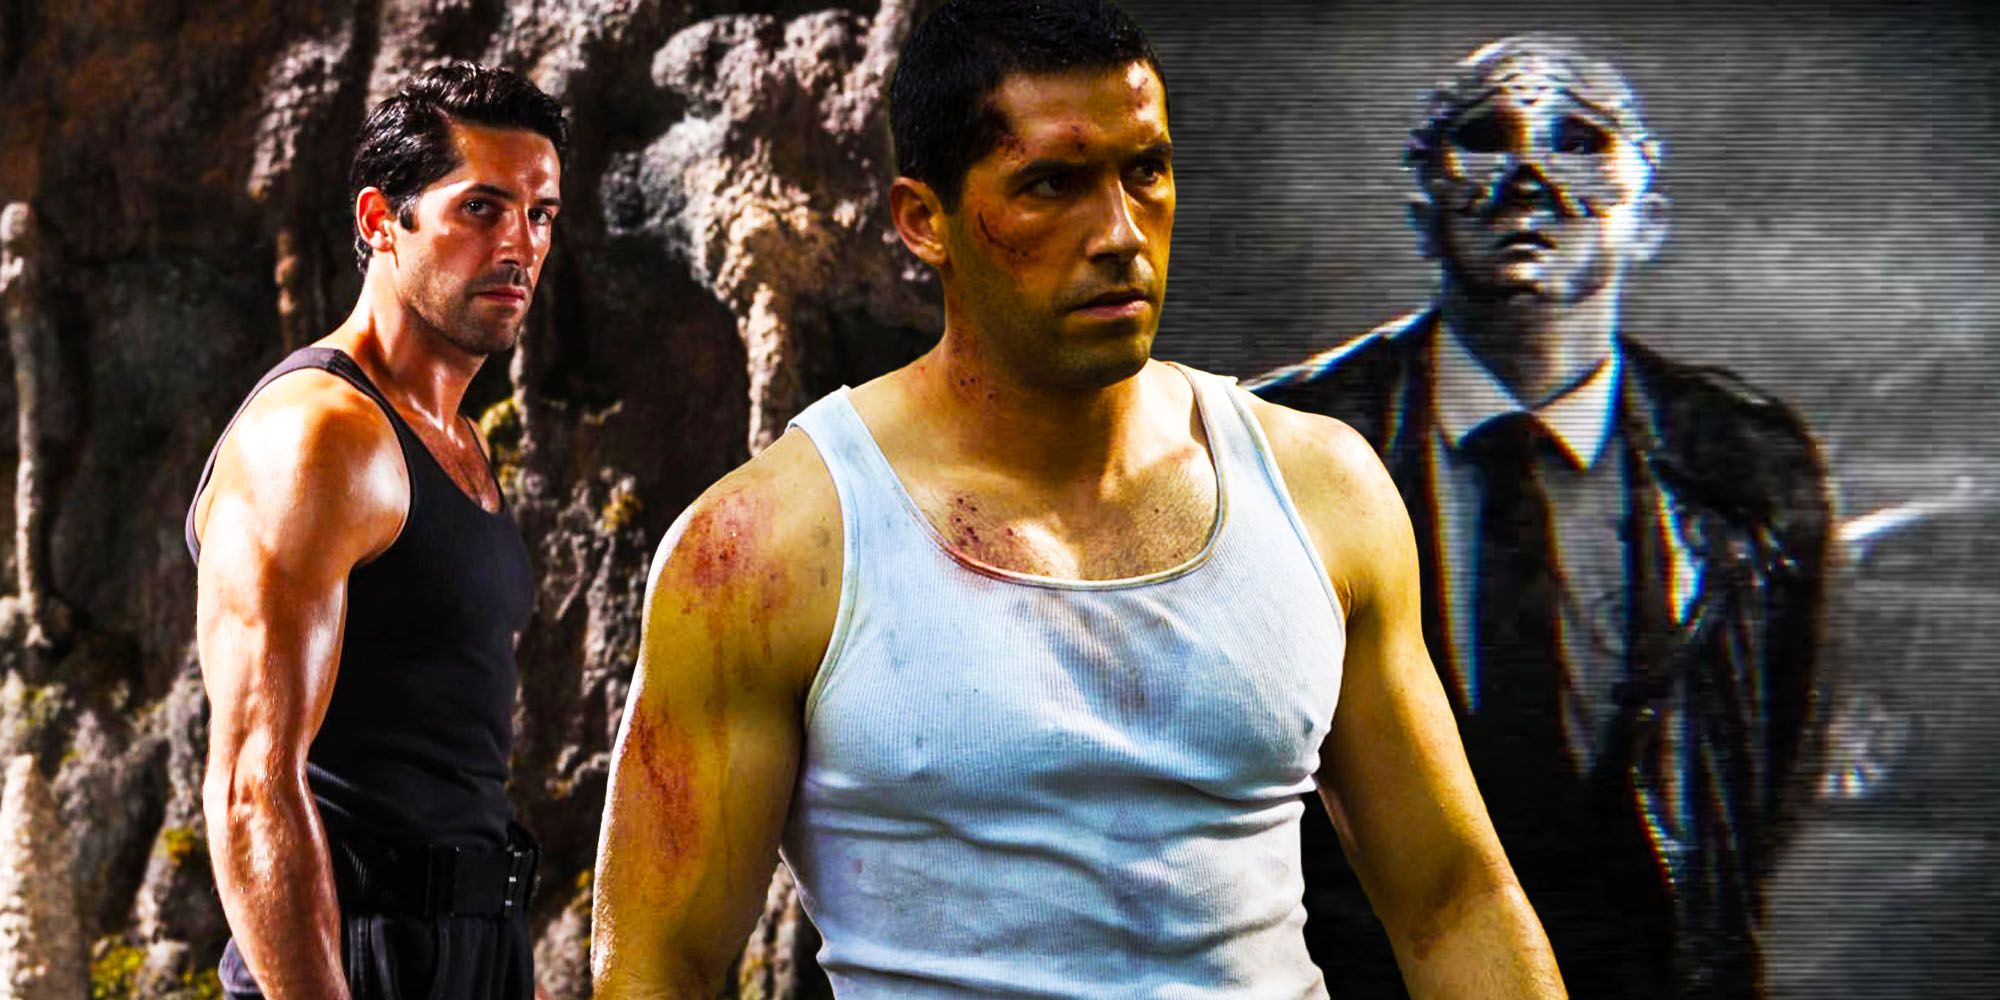 Scott adkins horror movies ranked home invasion universal soldier day of reckoning legendary